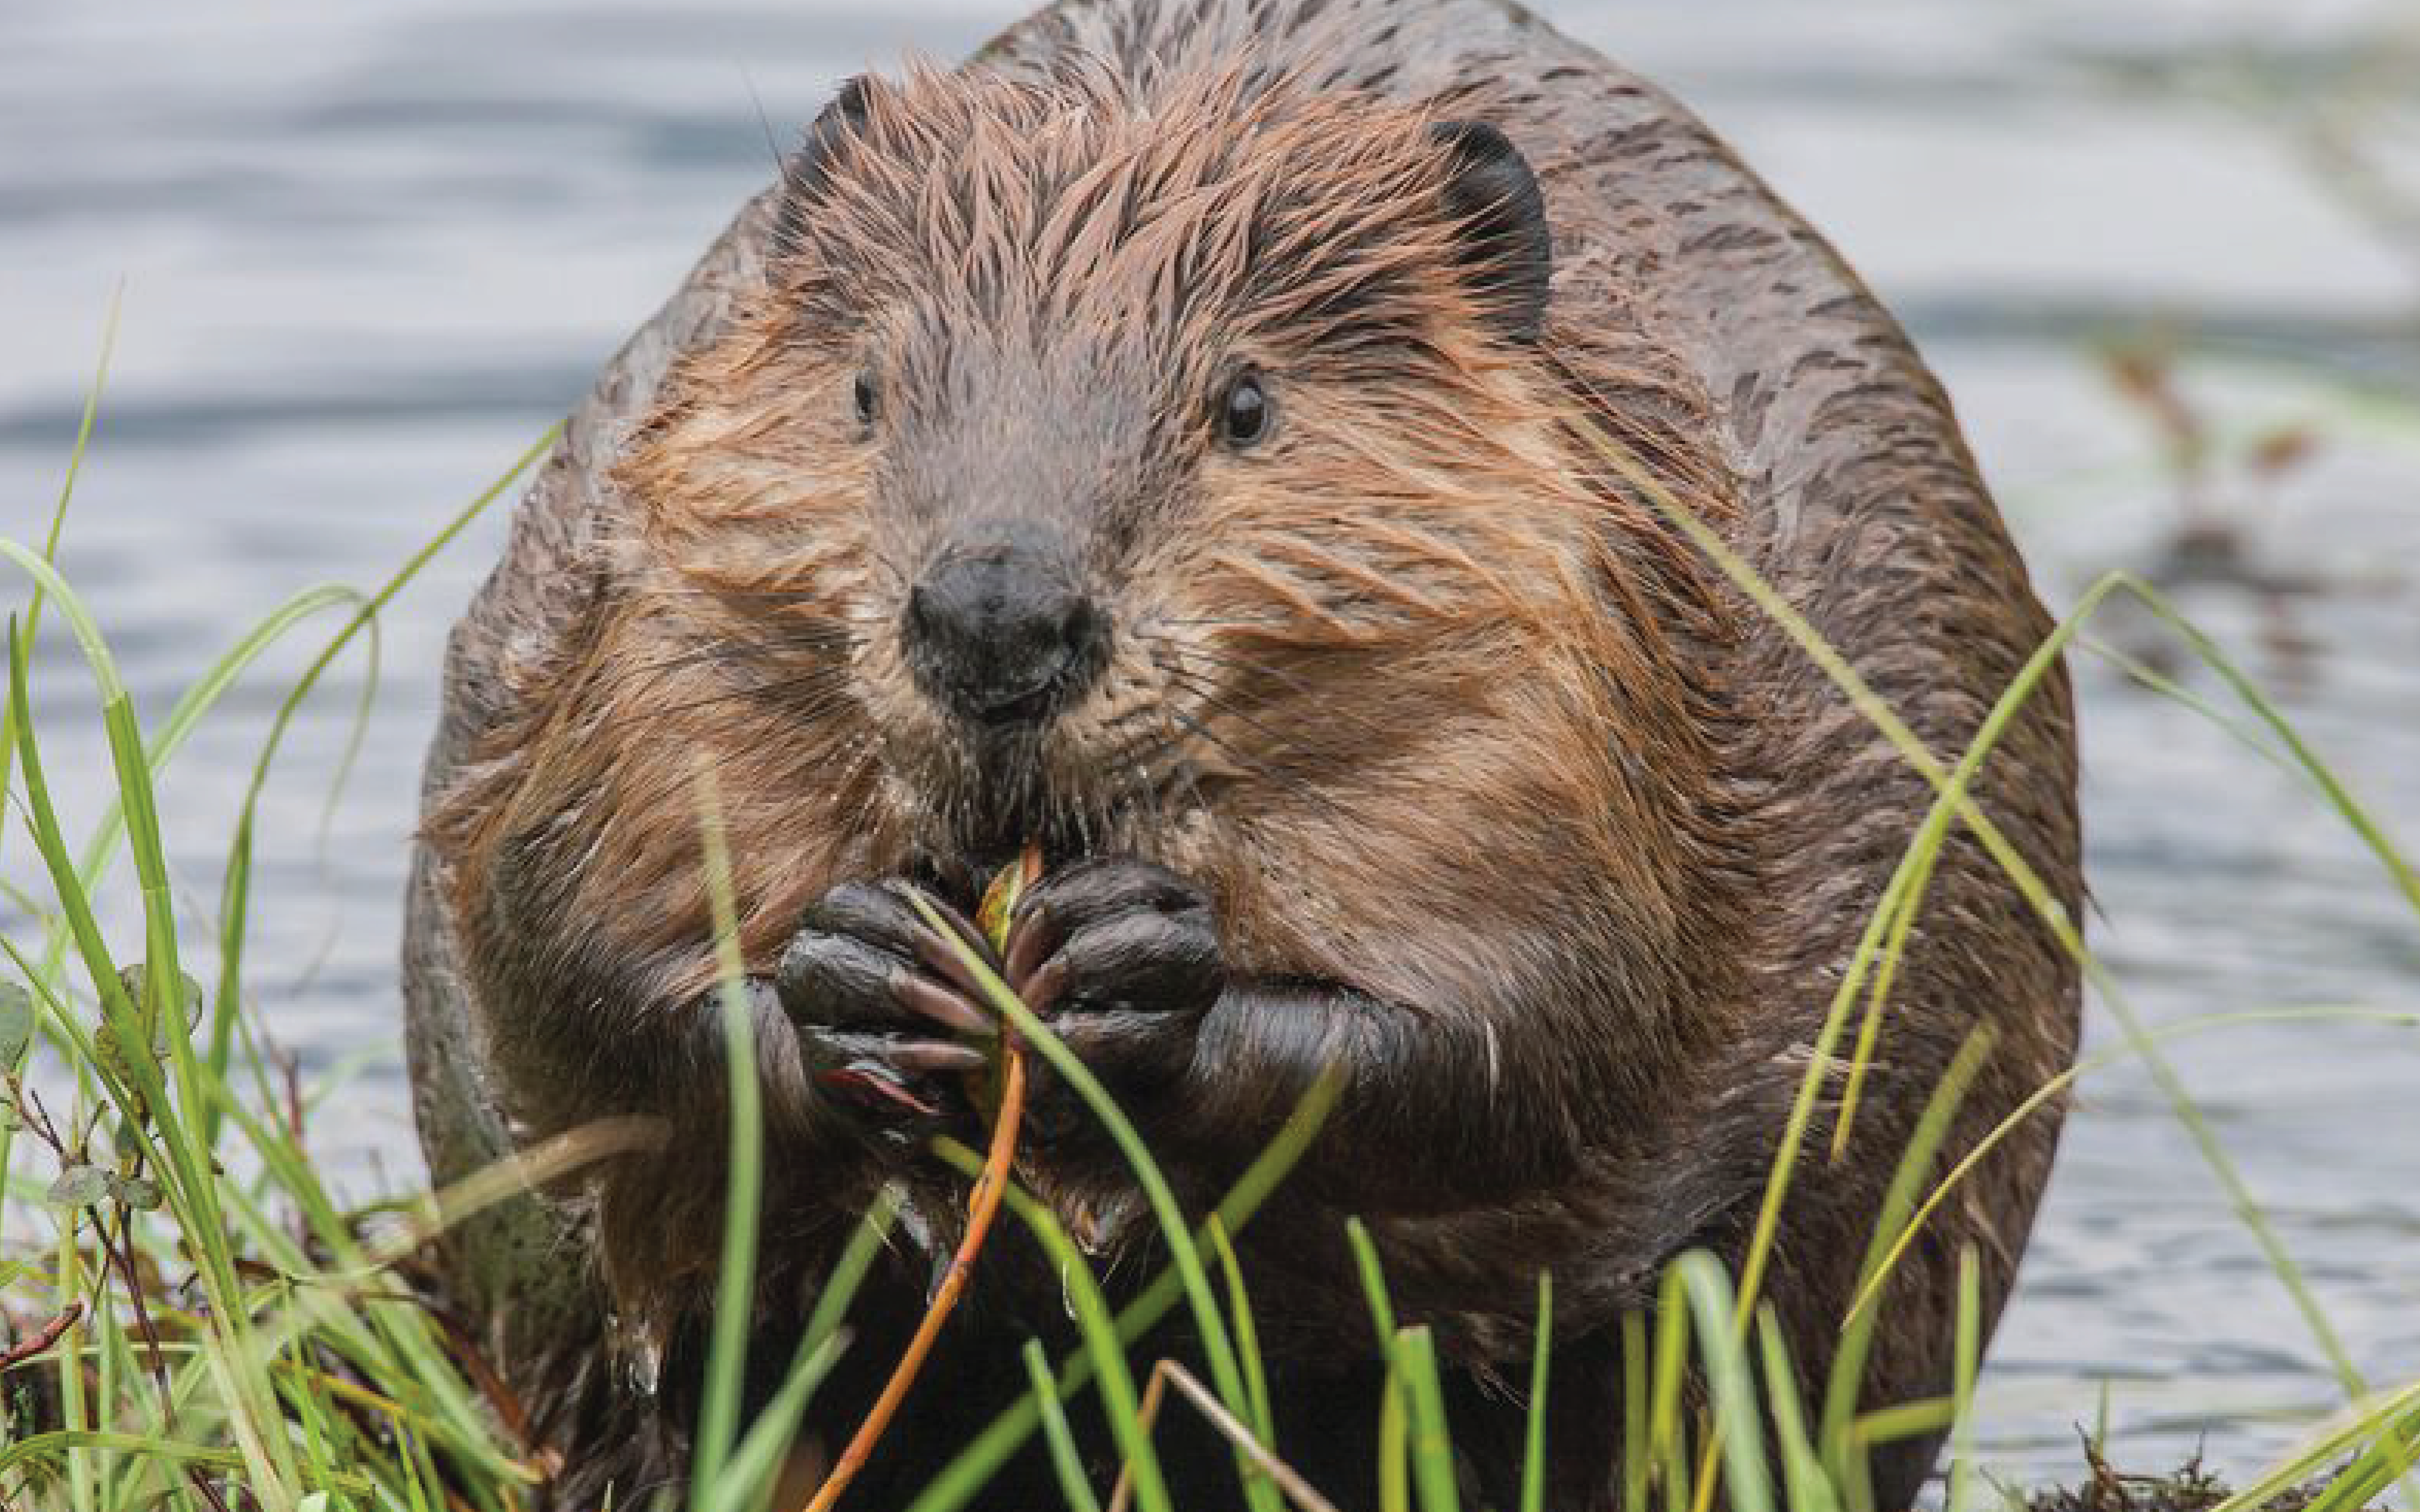 Guest View: Beavers and the Twisting of Sustainability